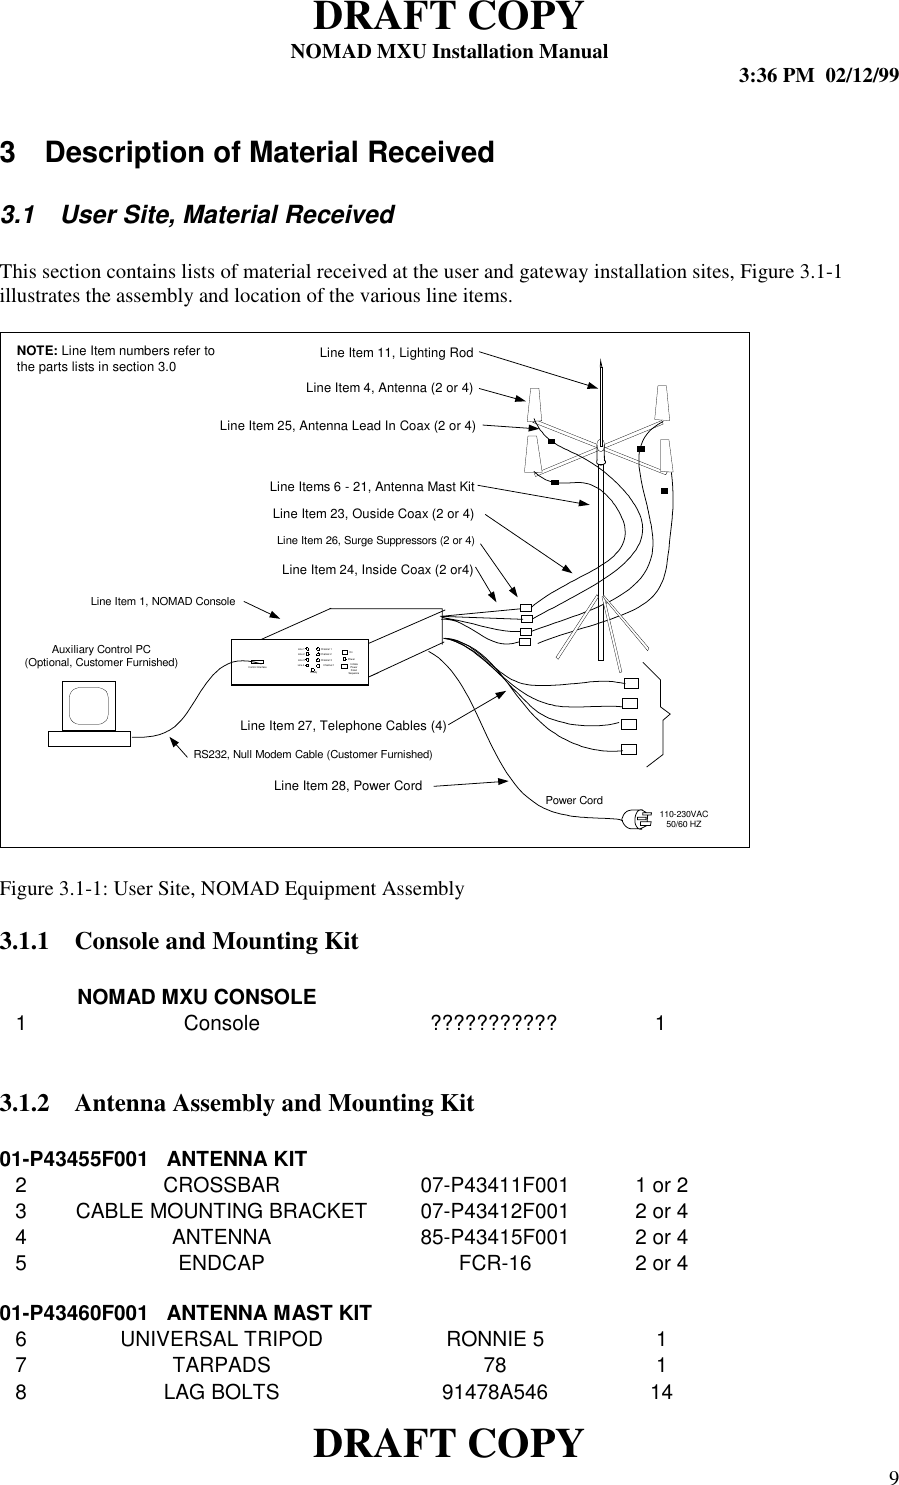 DRAFT COPYNOMAD MXU Installation Manual 3:36 PM  02/12/99DRAFT COPY 93  Description of Material Received3.1  User Site, Material ReceivedThis section contains lists of material received at the user and gateway installation sites, Figure 3.1-1illustrates the assembly and location of the various line items.Figure 3.1-1: User Site, NOMAD Equipment Assembly3.1.1 Console and Mounting KitNOMAD MXU CONSOLE1 Console ??????????? 13.1.2 Antenna Assembly and Mounting Kit01-P43455F001   ANTENNA KIT2 CROSSBAR 07-P43411F001 1 or 23 CABLE MOUNTING BRACKET 07-P43412F001 2 or 44 ANTENNA 85-P43415F001 2 or 45 ENDCAP FCR-16 2 or 401-P43460F001   ANTENNA MAST KIT6 UNIVERSAL TRIPOD RONNIE 5 17 TARPADS 78 18 LAG BOLTS 91478A546 14Line 1Line 2Line 3Line 4Channel  1Channel  2Channel  3OnReadyPowerChann el 1 Init iatePowerDownSequenceCont rol Inte rface110-230VAC50/60 HZLine Item 4, Antenna (2 or 4)Auxiliary Control PC(Optional, Customer Furnished)RS232, Null Modem Cable (Customer Furnished)Power CordLine Item 26, Surge Suppressors (2 or 4)Line Item 1, NOMAD ConsoleLine Item 11, Lighting RodLine Item 23, Ouside Coax (2 or 4)Line Item 24, Inside Coax (2 or4)Line Item 25, Antenna Lead In Coax (2 or 4)Line Item 27, Telephone Cables (4)Line Item 28, Power CordLine Items 6 - 21, Antenna Mast KitNOTE: Line Item numbers refer tothe parts lists in section 3.0